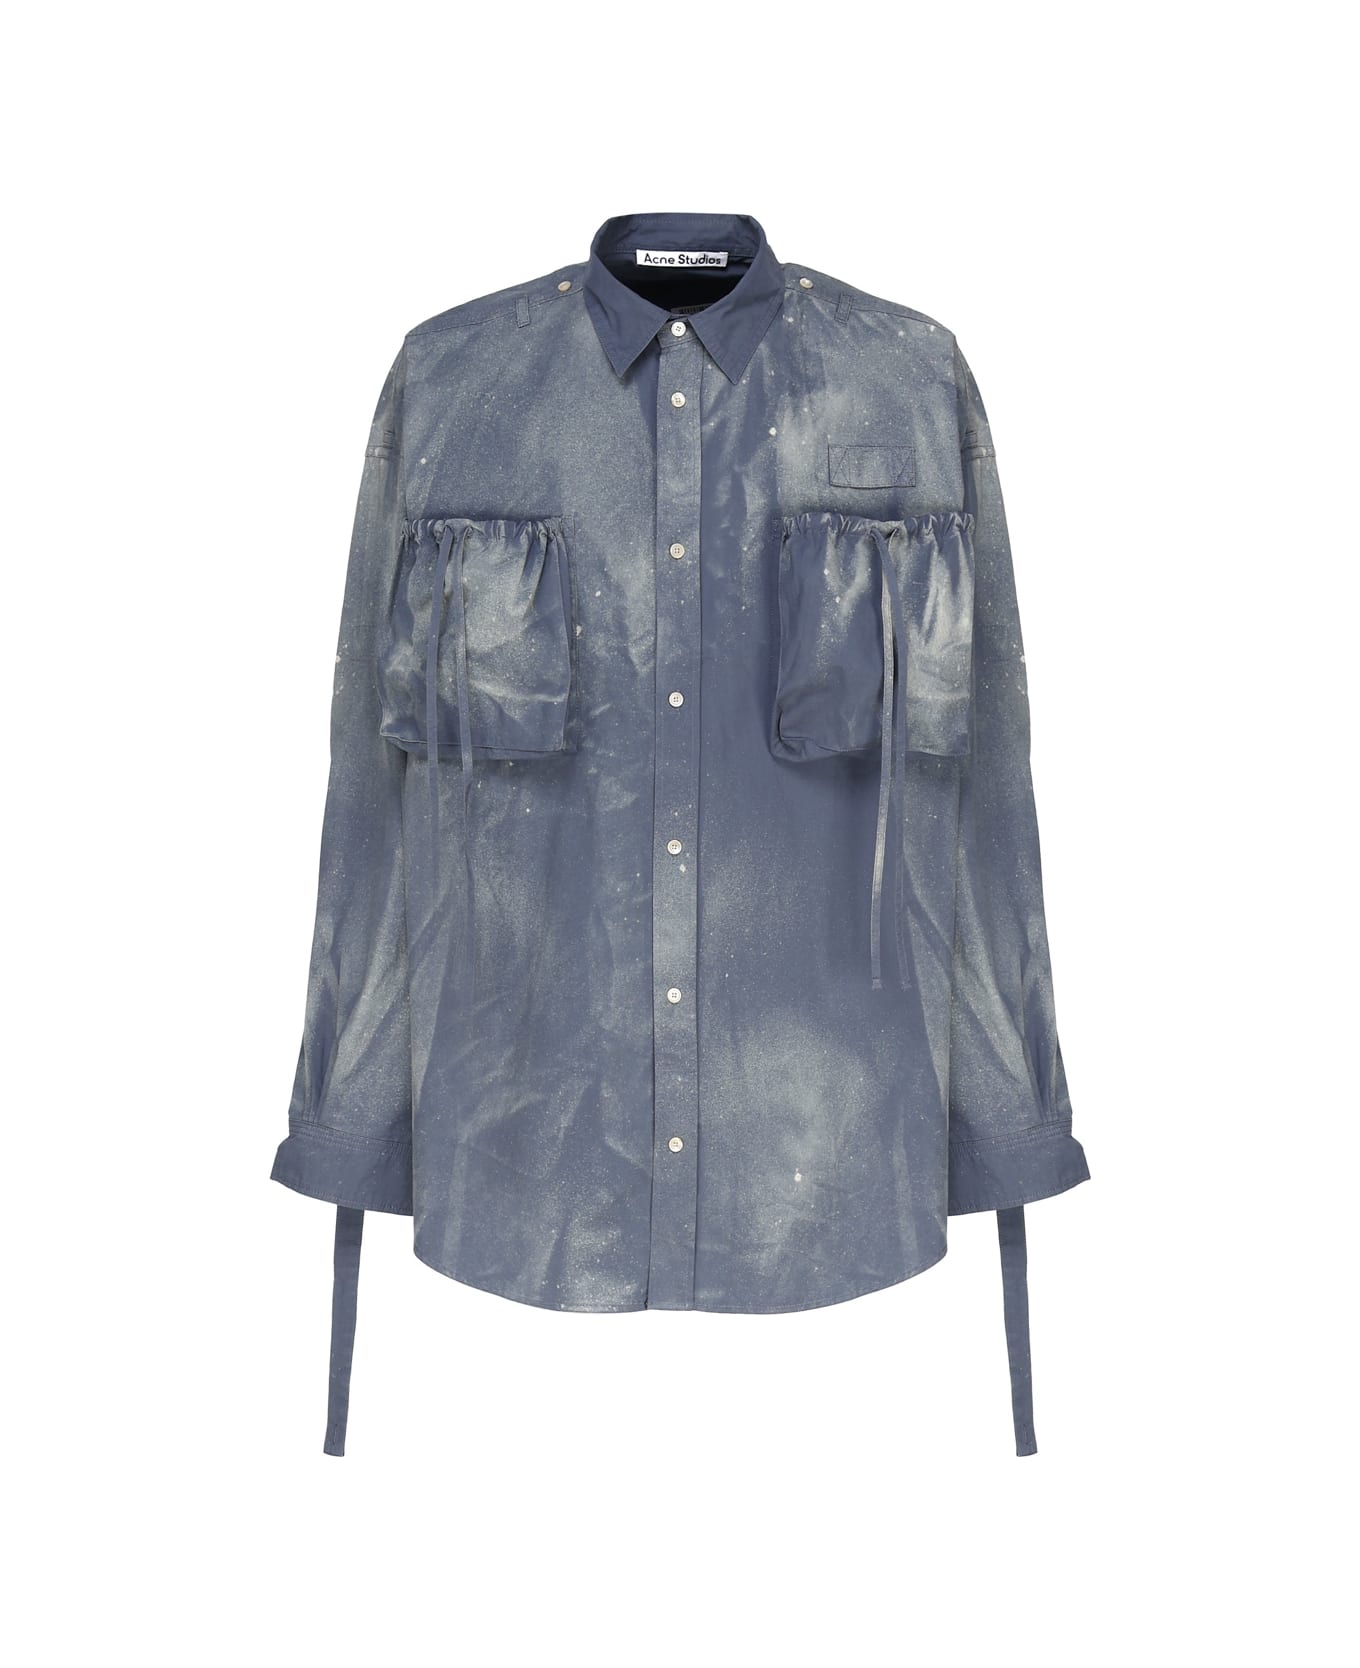 Acne Studios Shirt With Buttons And Spray Treatment - Mid blue